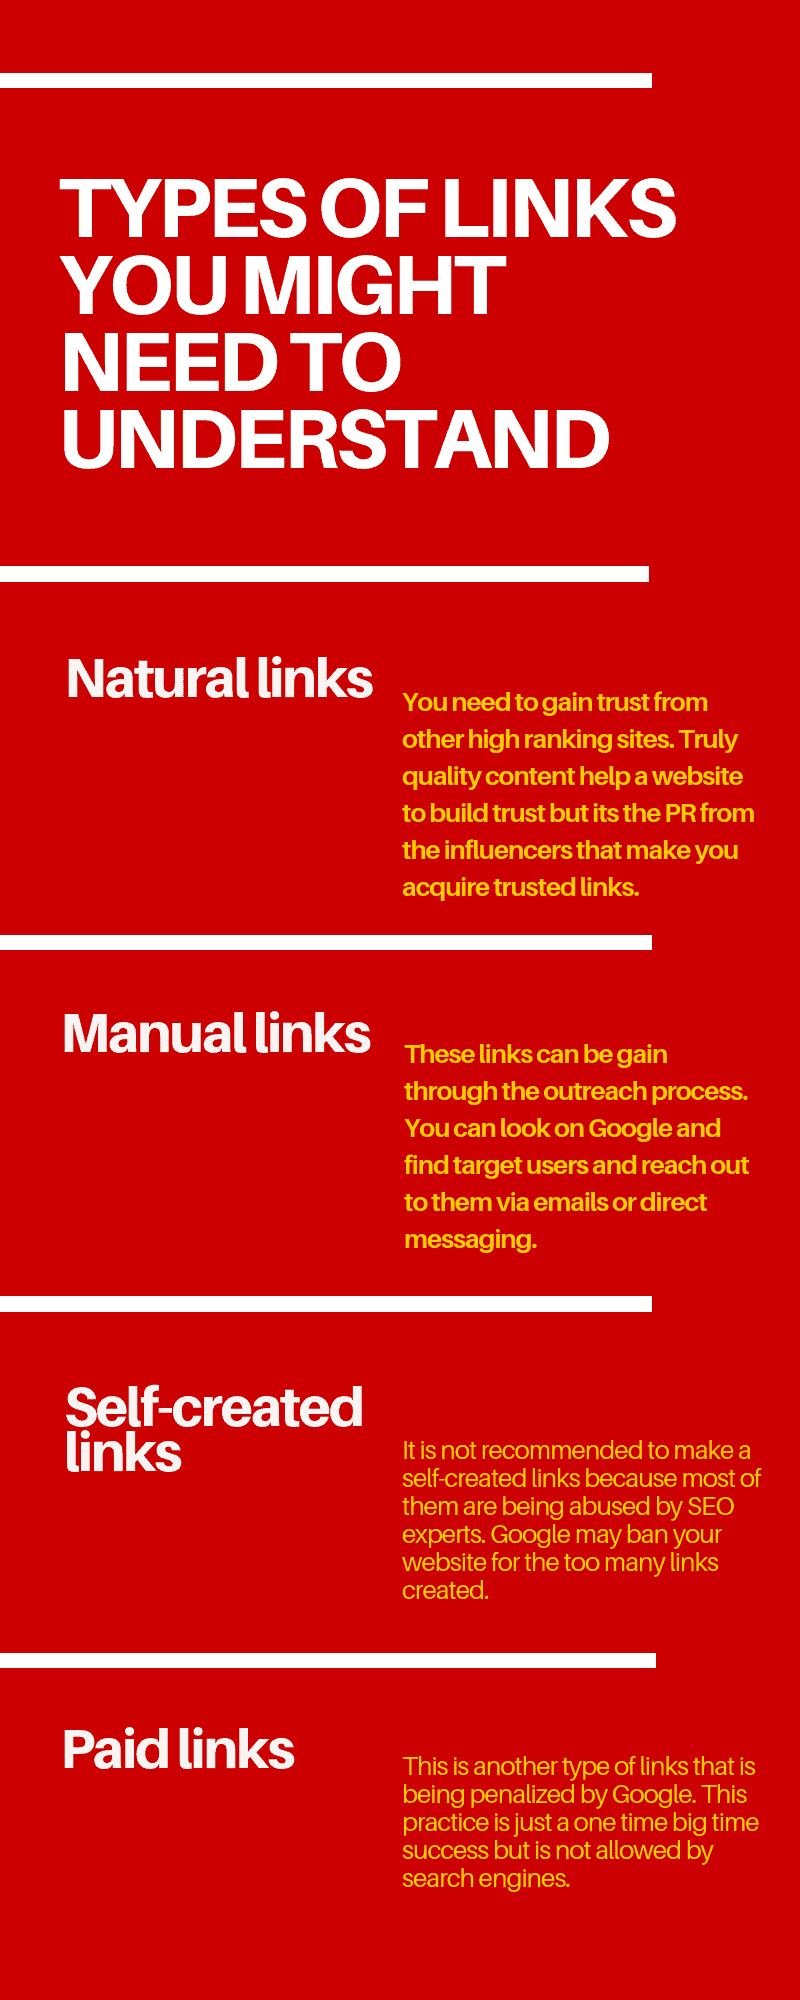 Types of links you might need to understand